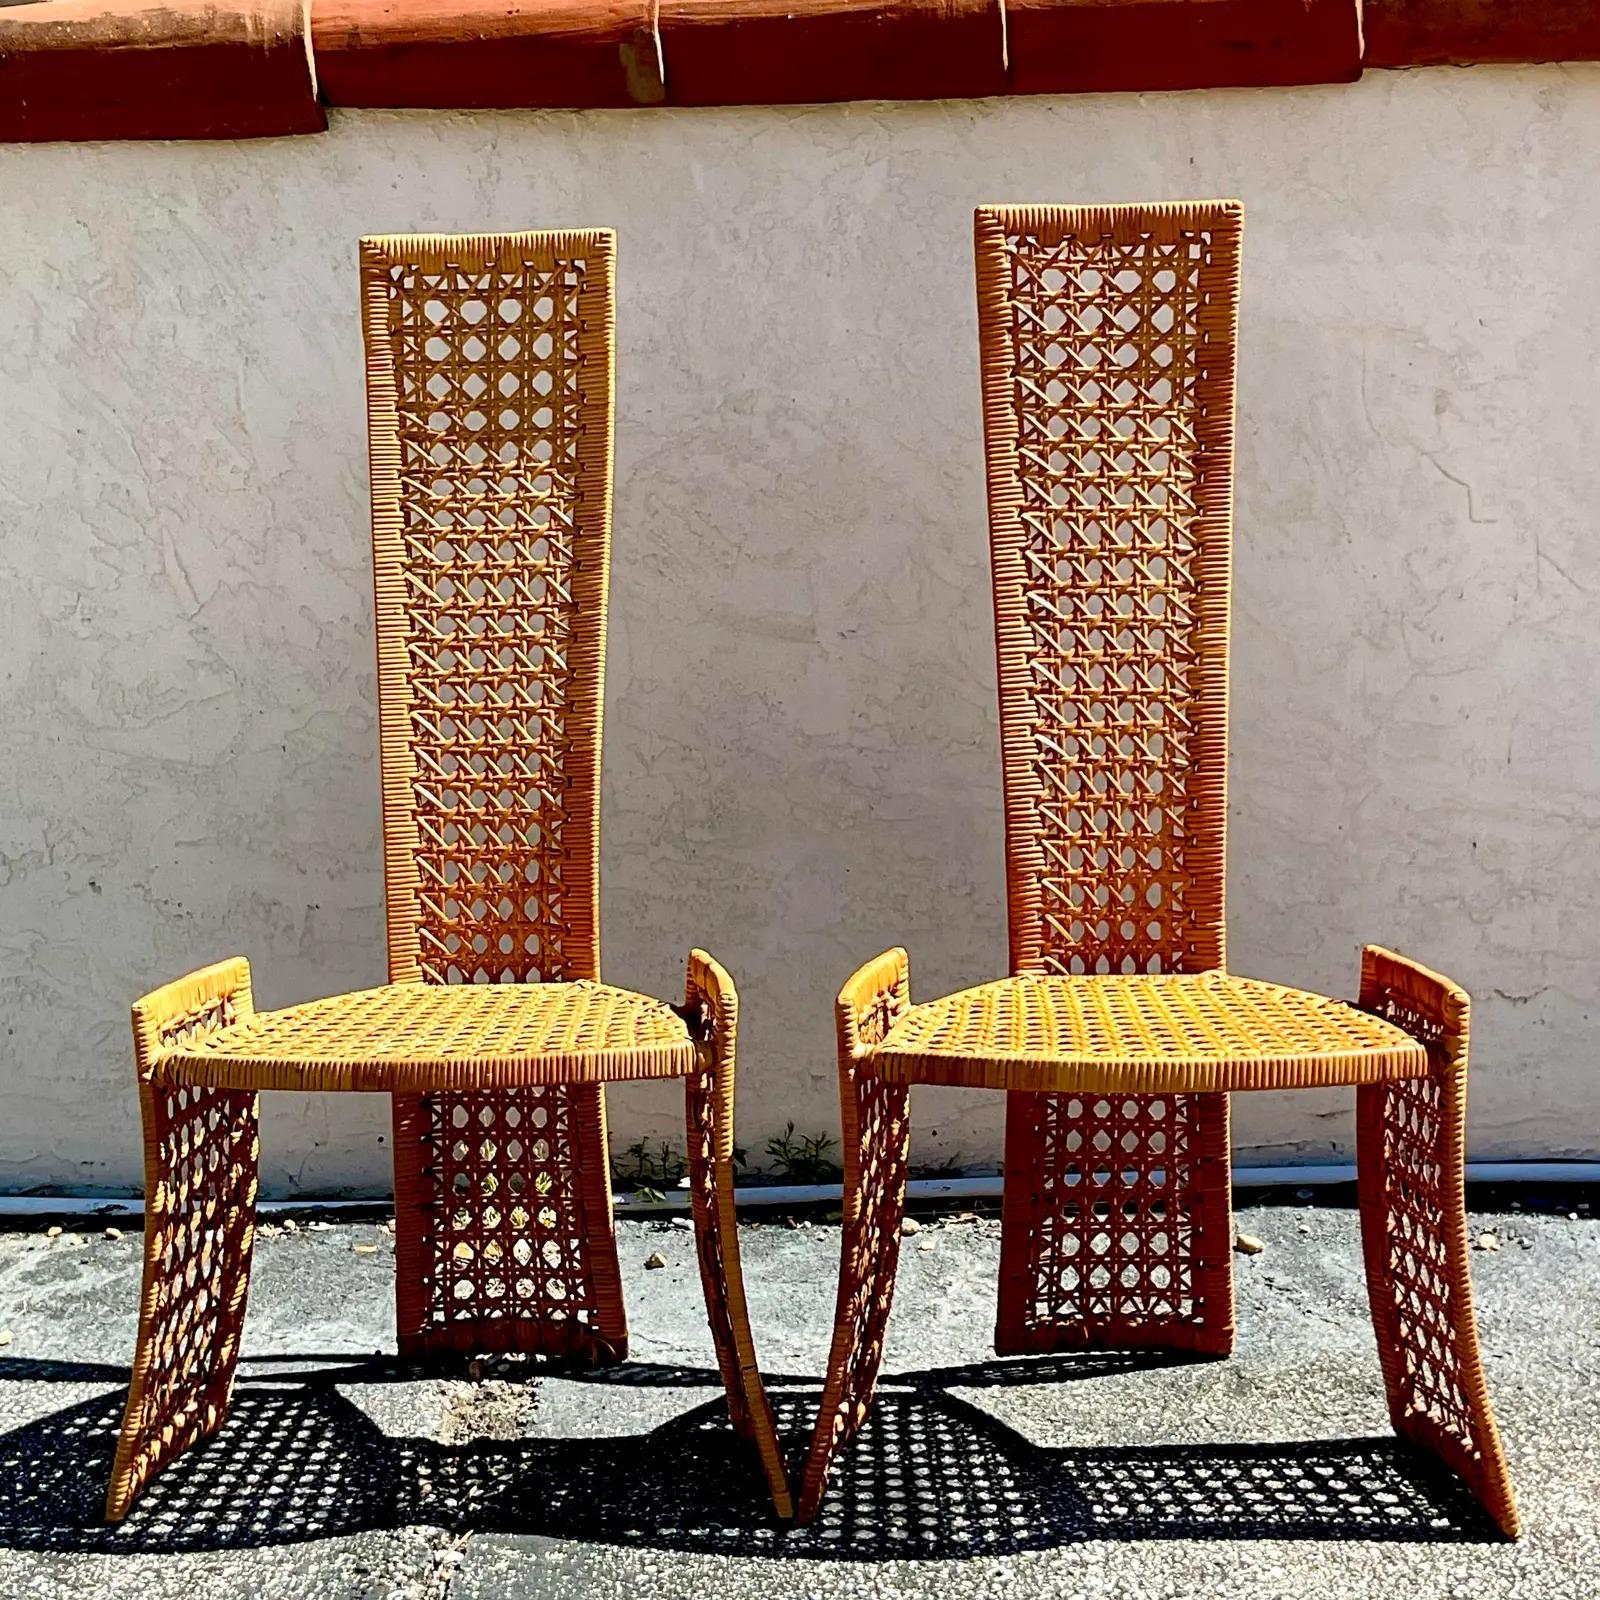 Philippine Vintage Coastal Danny Ho Fong Cane Dining Chairs, a Pair